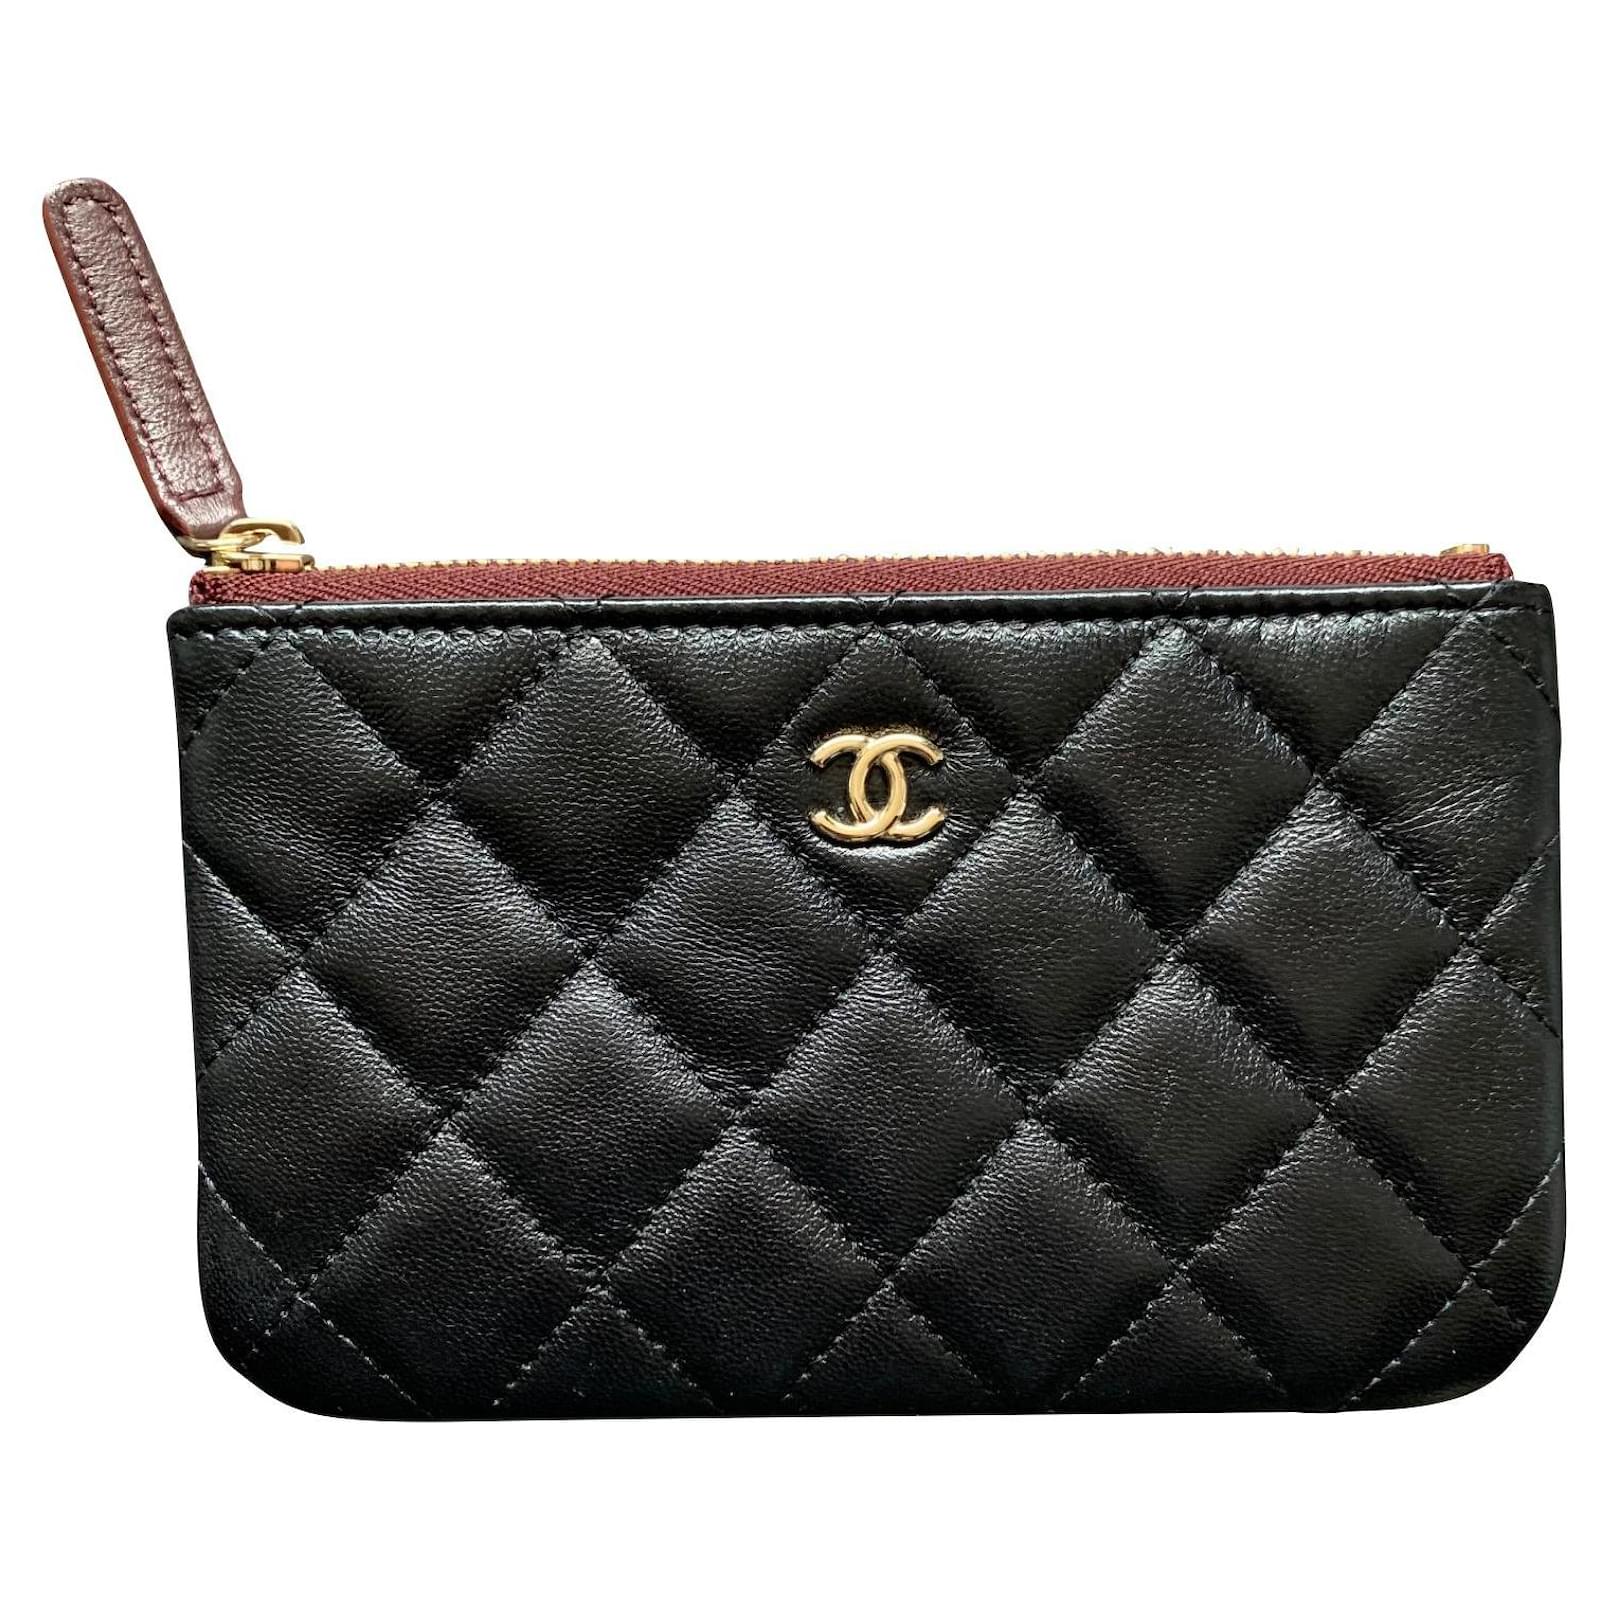 Purses, Wallets, Cases Chanel Timeless Classique Small Bag, Purse